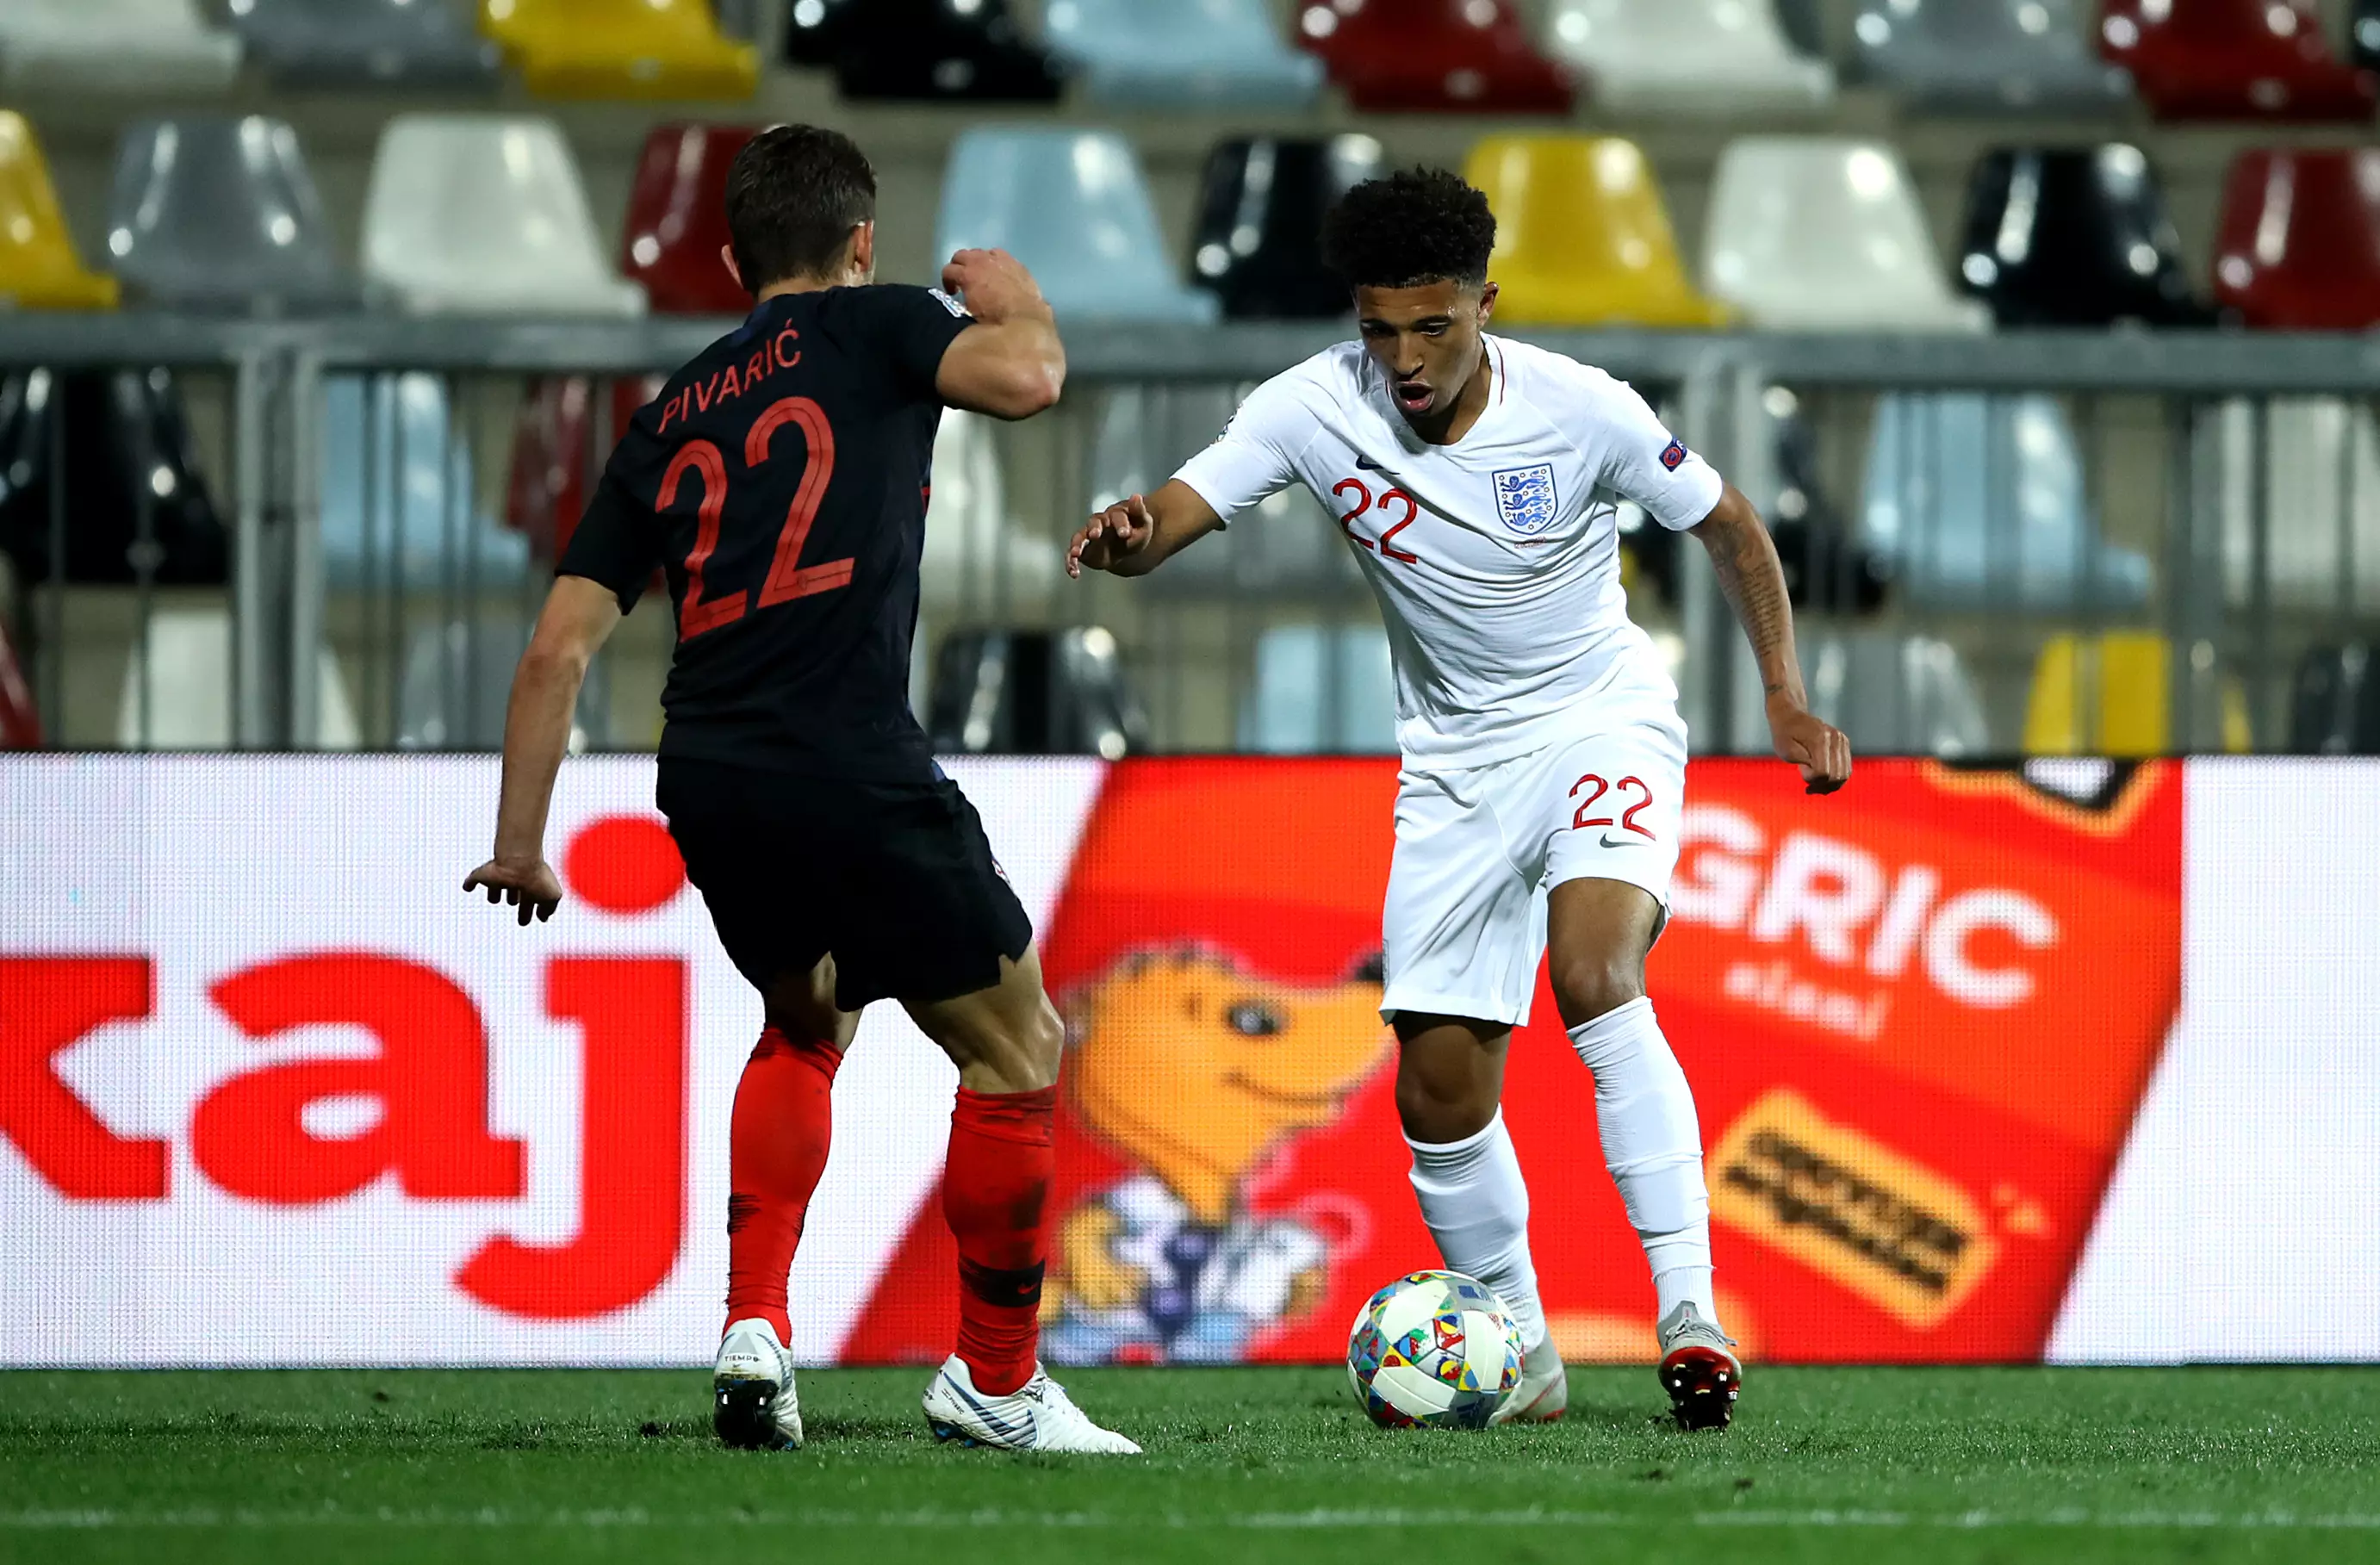 Sancho's been collecting assists for fun this season, earning him a game against Croatia. Image: PA Images